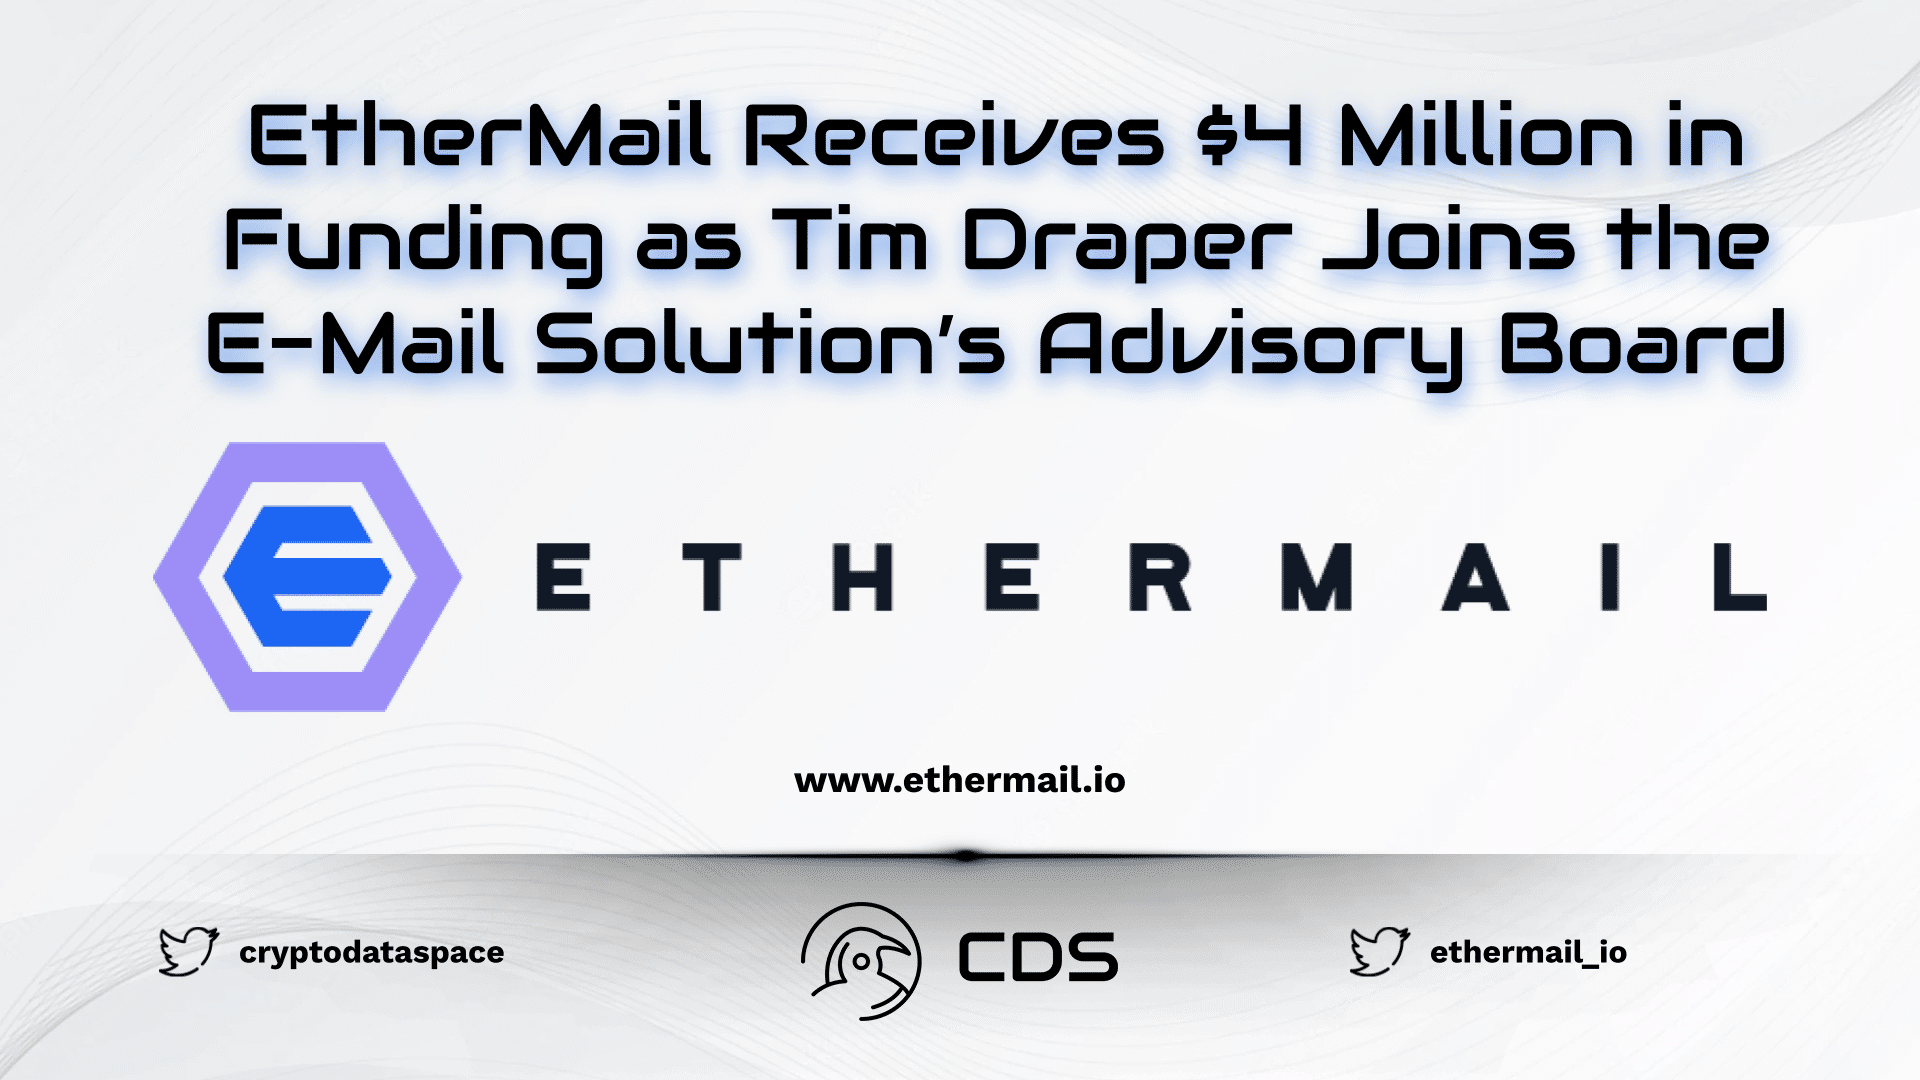 EtherMail Receives $4 Million in Funding as Tim Draper Joins the E-Mail Solution’s Advisory Board